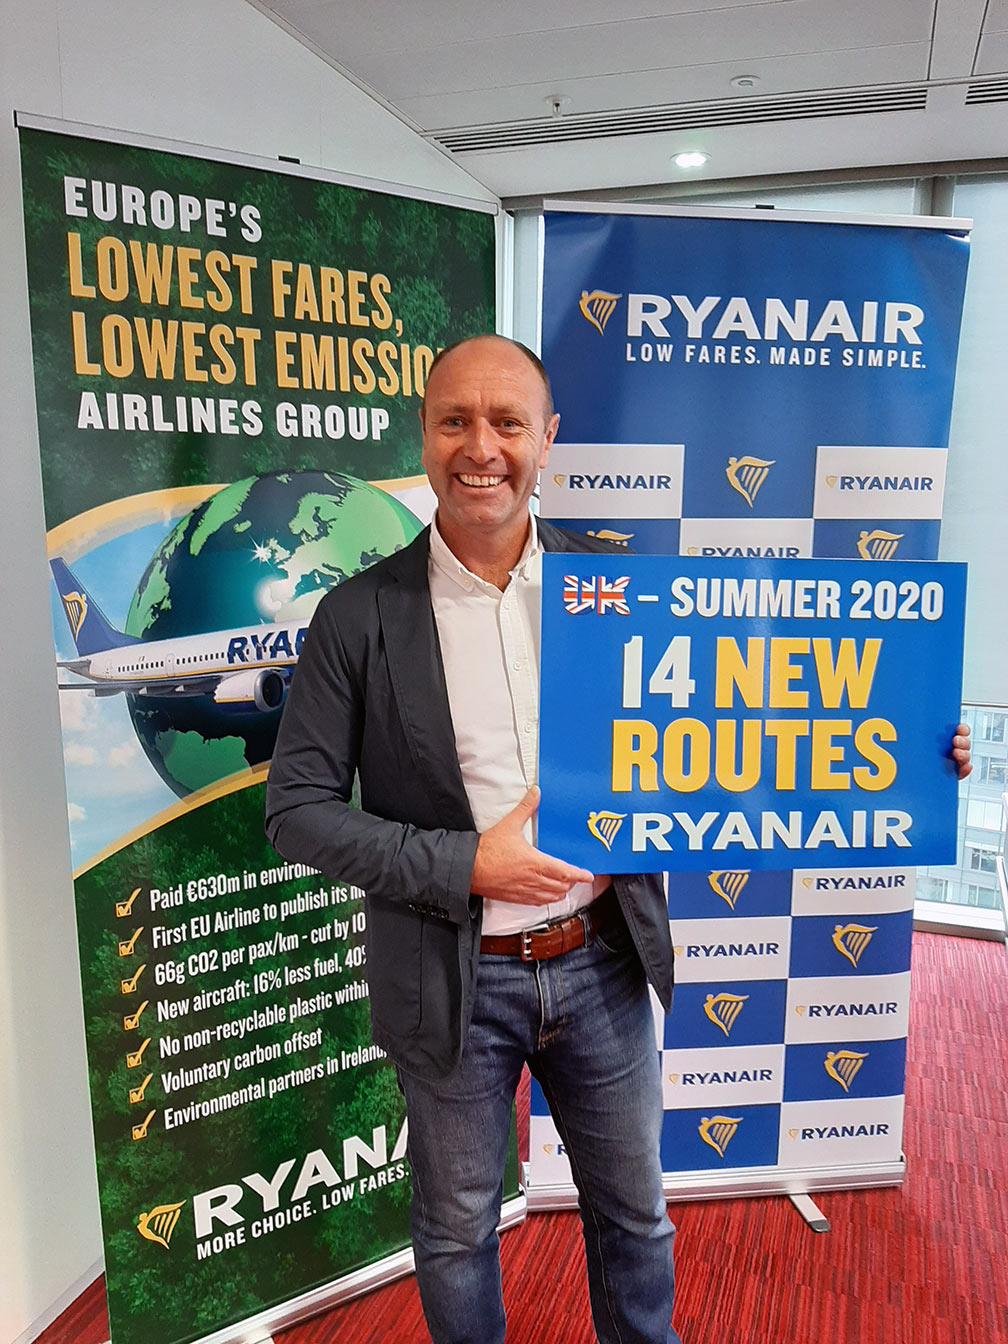 Ryanair Launches UK Summer 20 Schedule – More Than 500 Routes On Sale Now